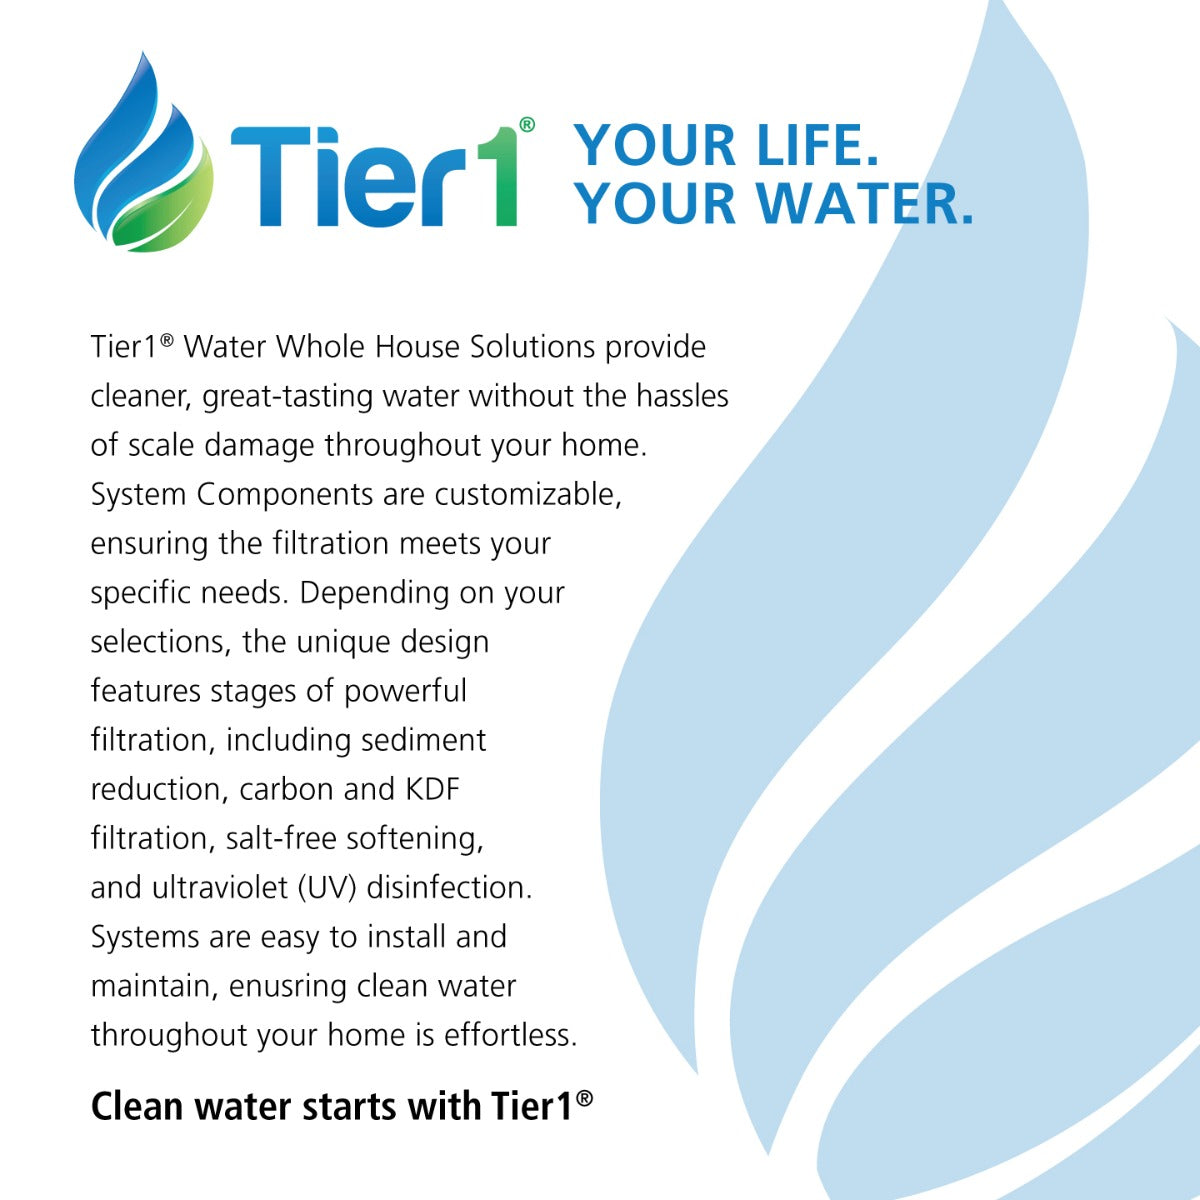 Precision Series Tier1 Whole House Water Filtration System for Chloramine and Chlorine, Taste & Odor Reduction for 4 - 6 Bathrooms